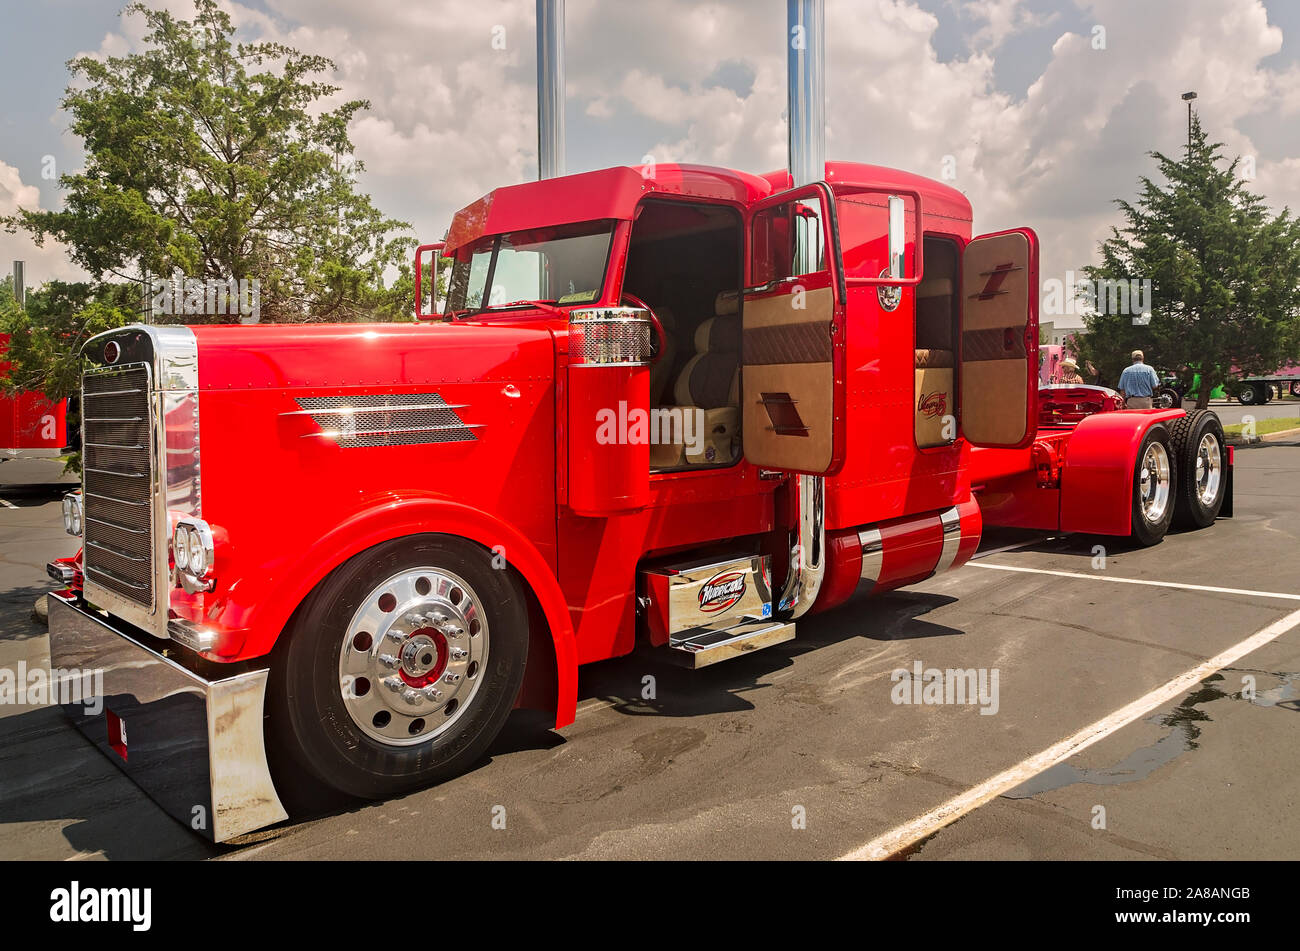 A 1990 Peterbilt 379 waits to be judged at the 34th annual Shell Rotella SuperRigs truck beauty contest in Joplin, Missouri. Stock Photo